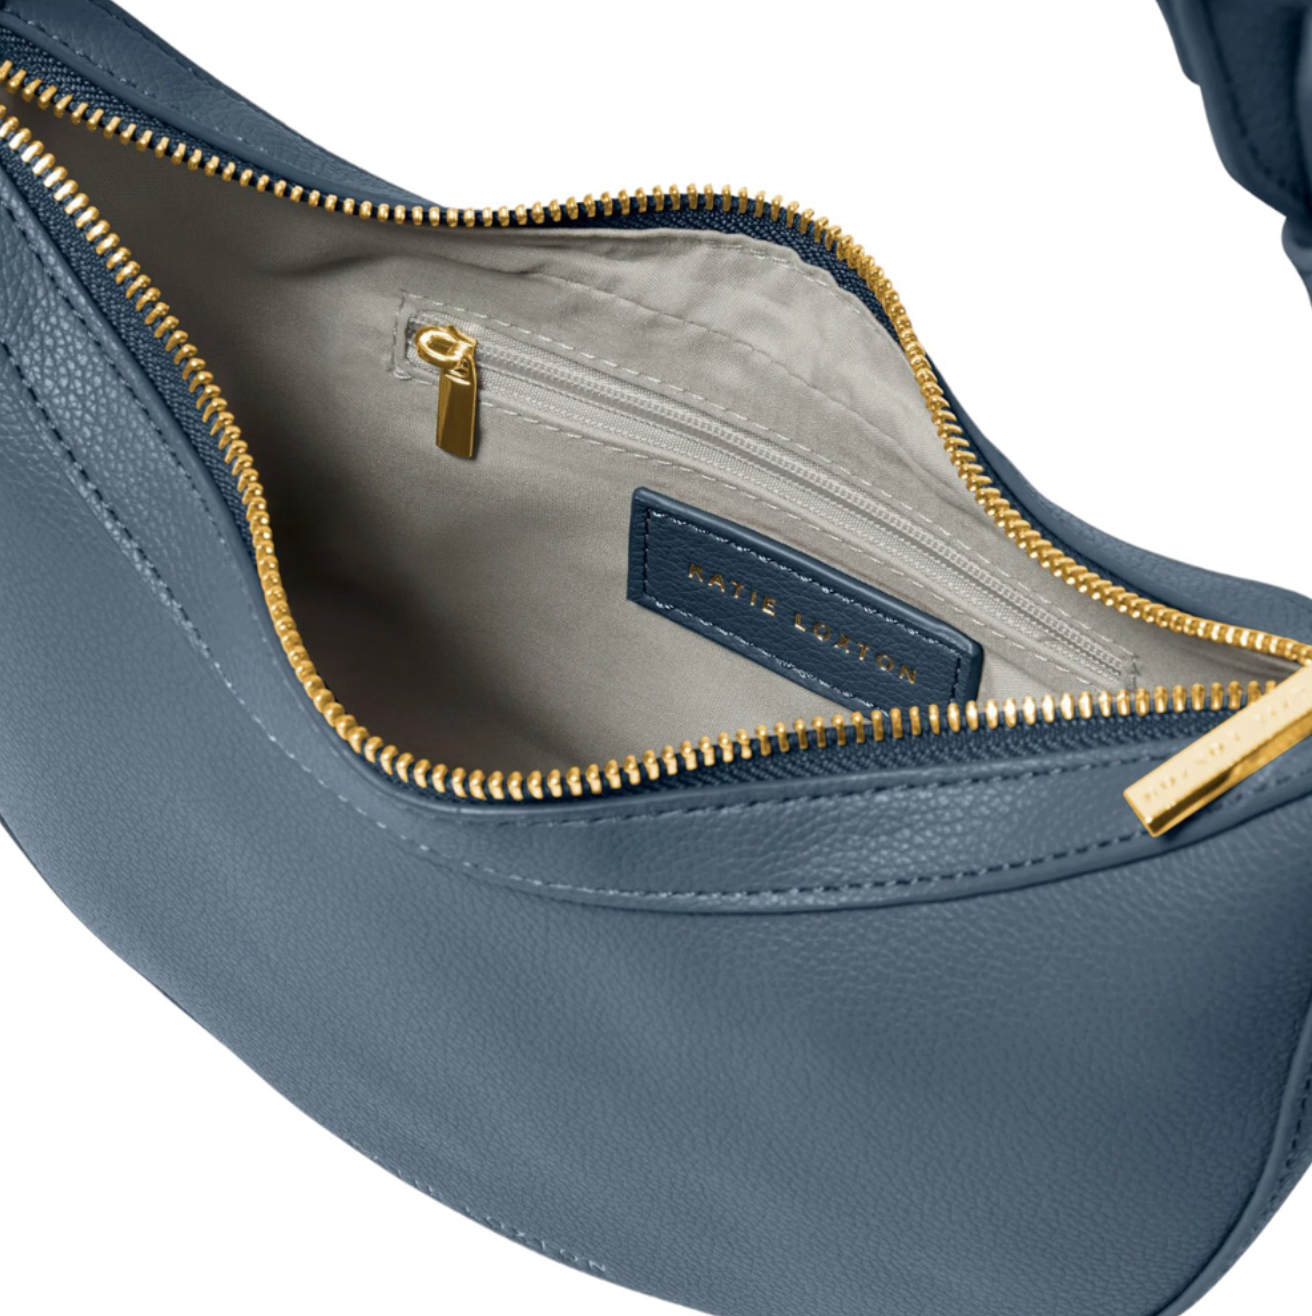 interior of Katie Loxton marni scoop bag in navy.  Shows grey lining fabric and interior side pocket with zip